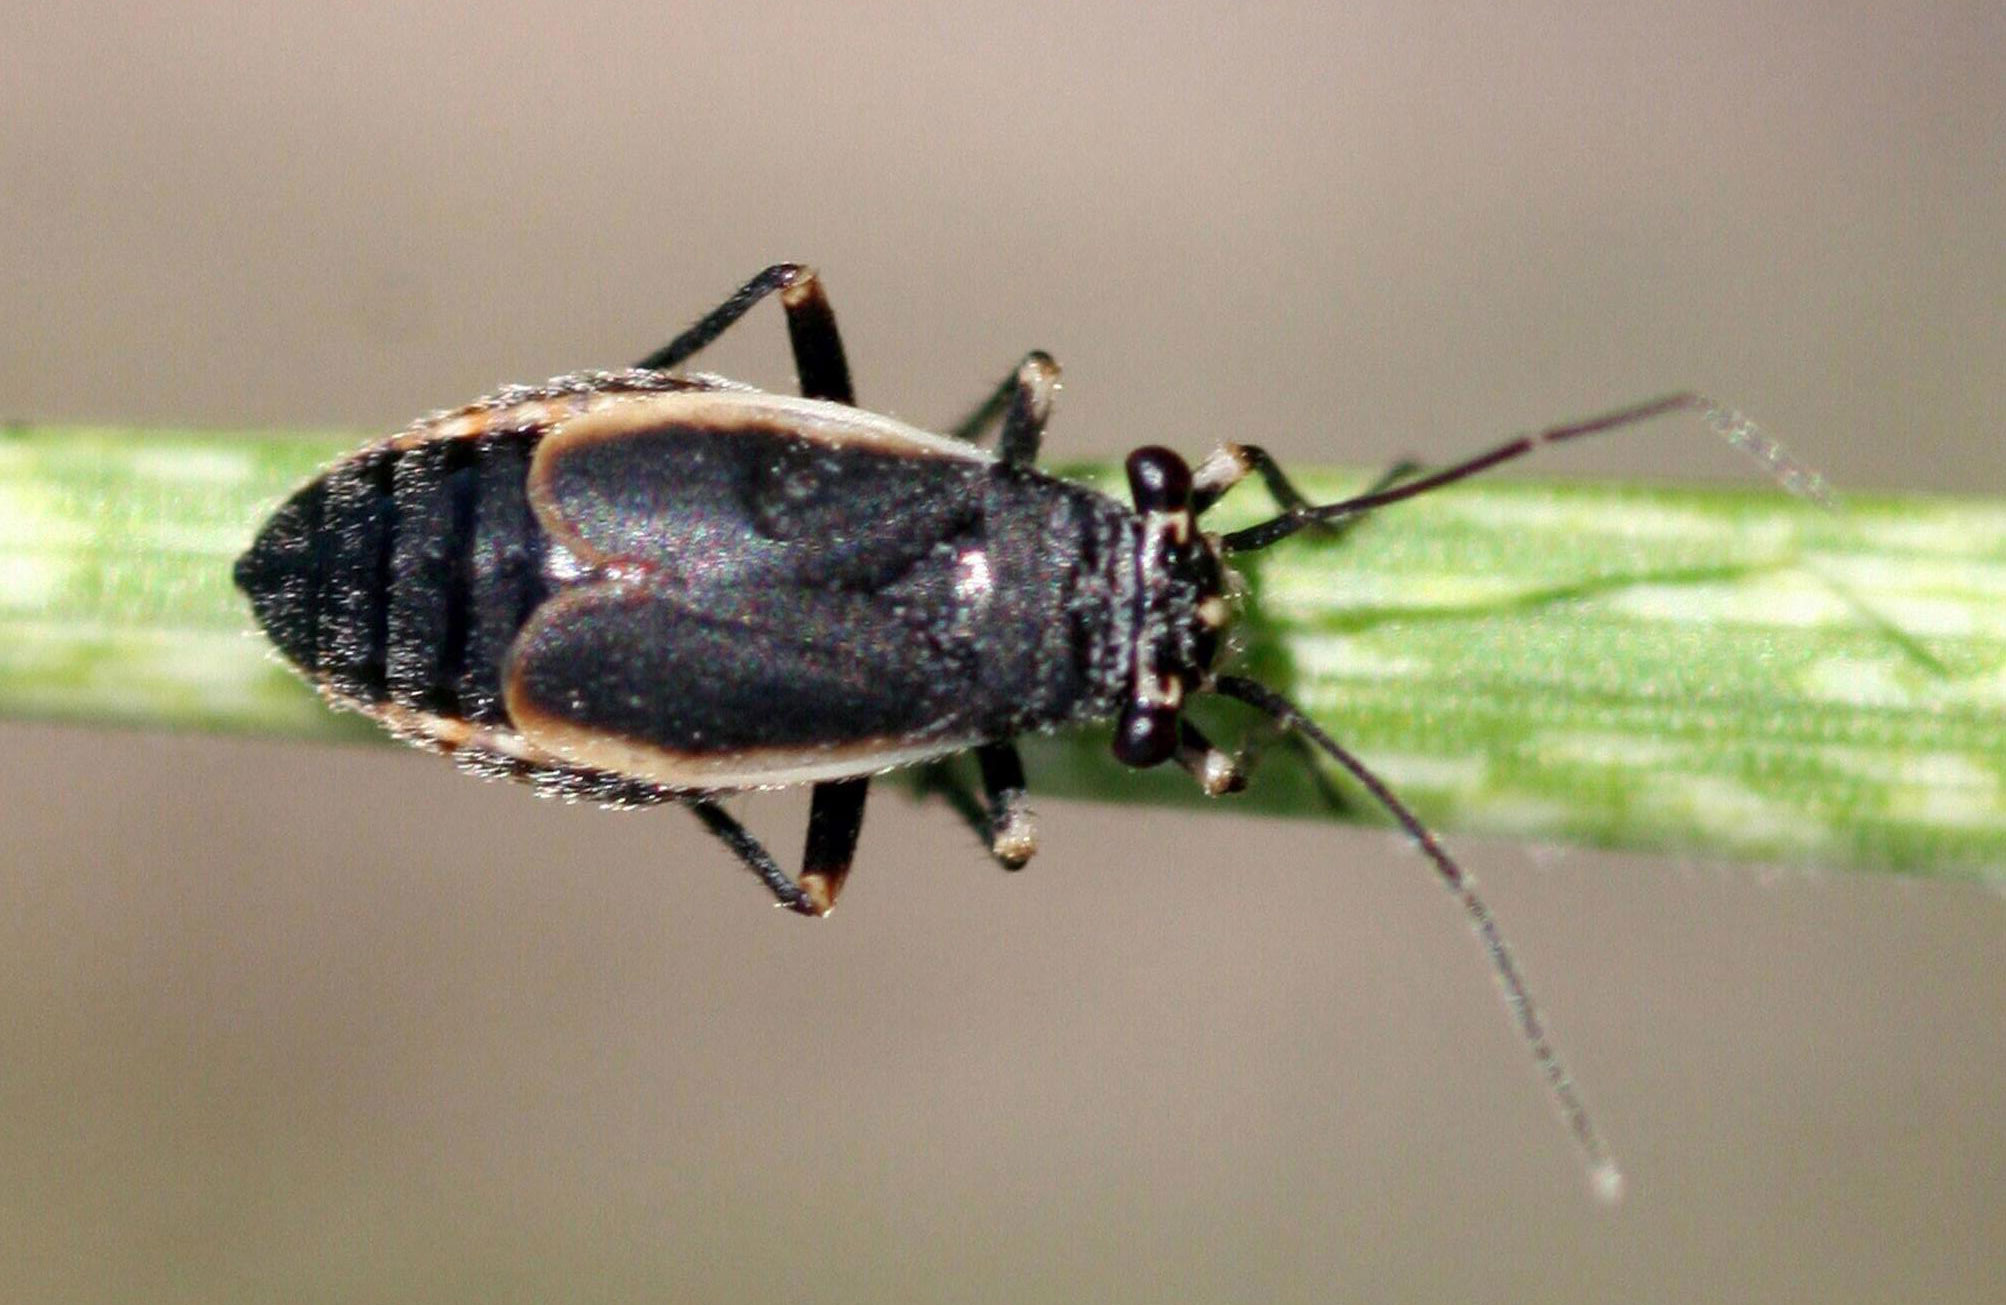 A small black bug with tan margins on the wings. This insect is resting on a blade of grass that is green with white spots.